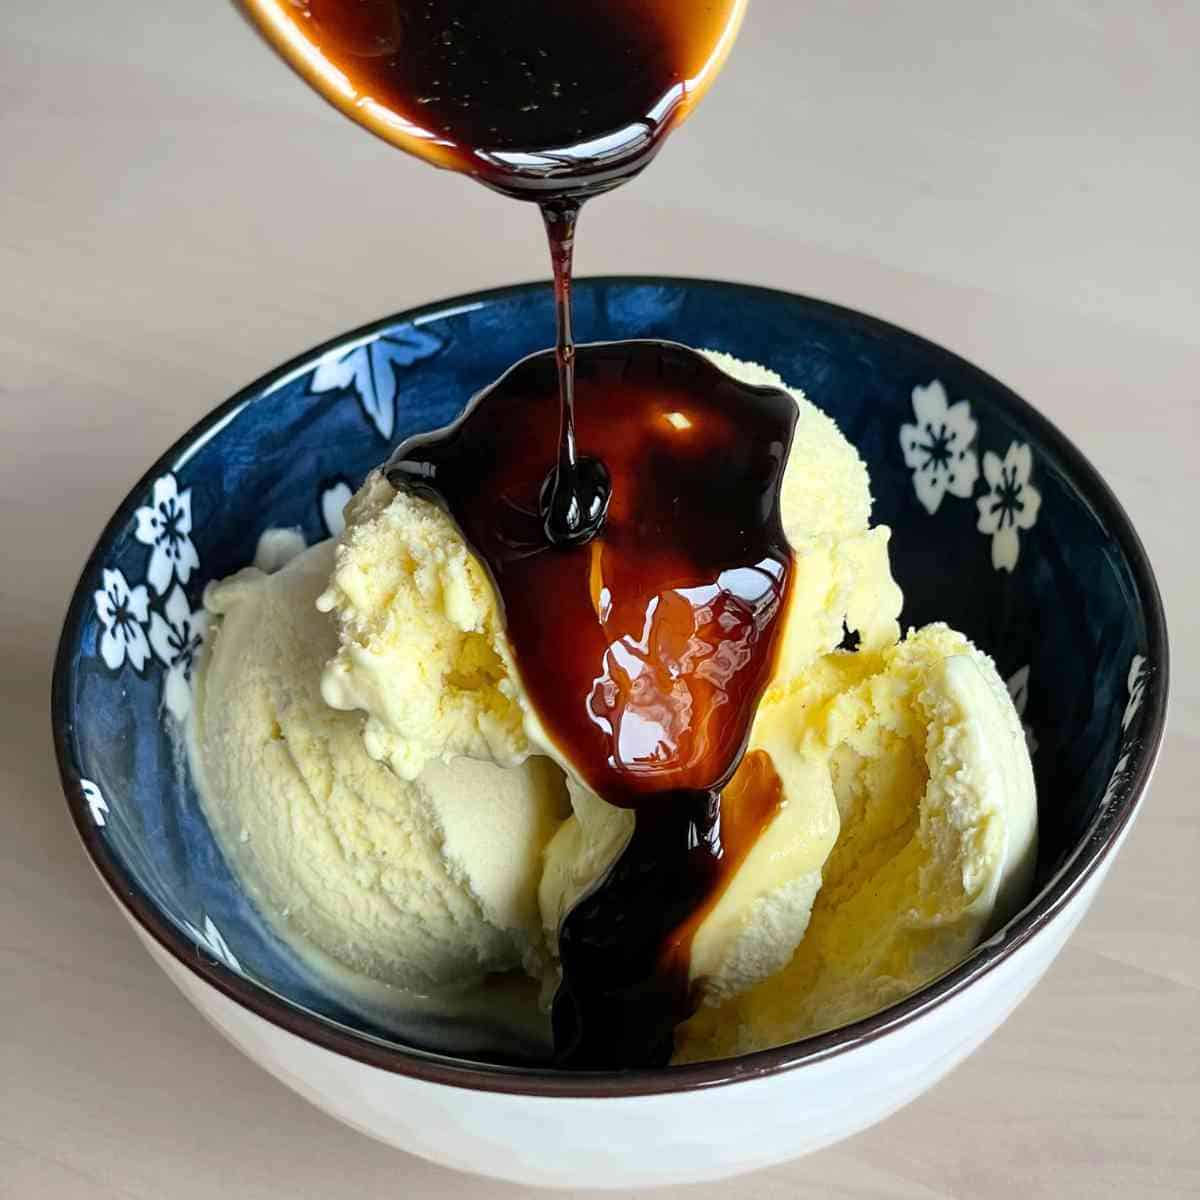 pouring the syrup over ice cream